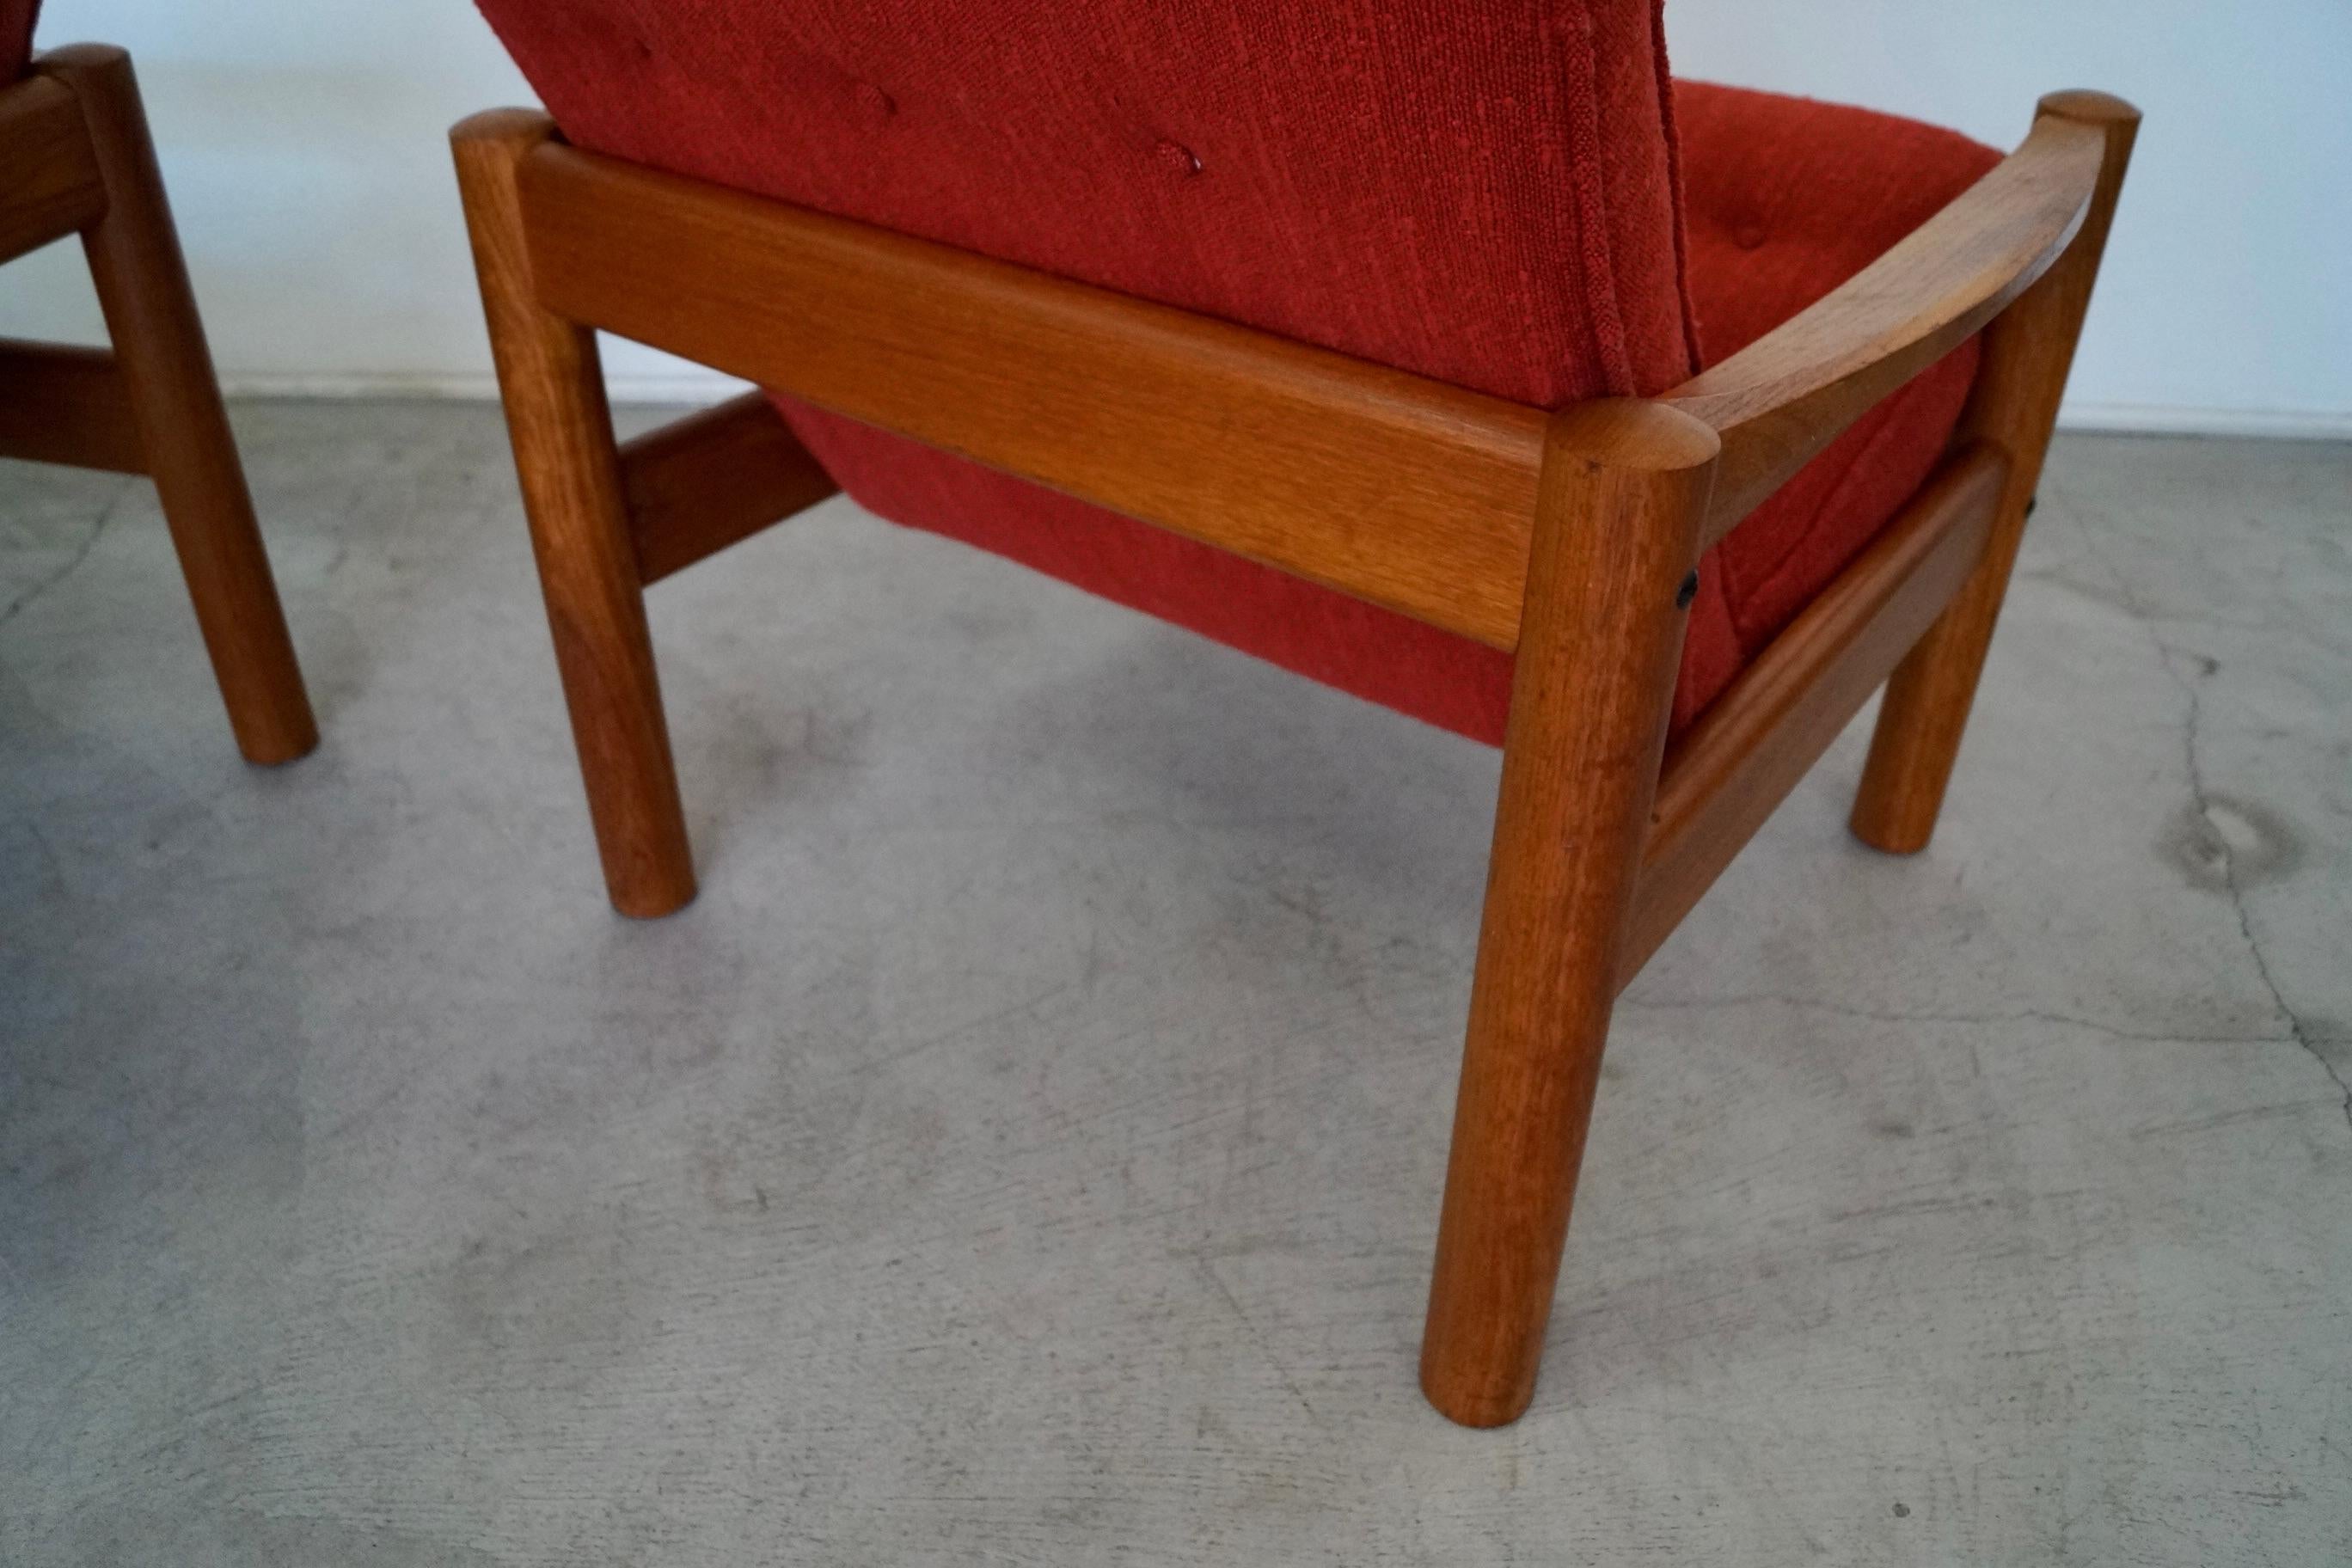 1970's Danish Modern Teak Lounge Chairs by Domino Mobler - a Pair For Sale 11